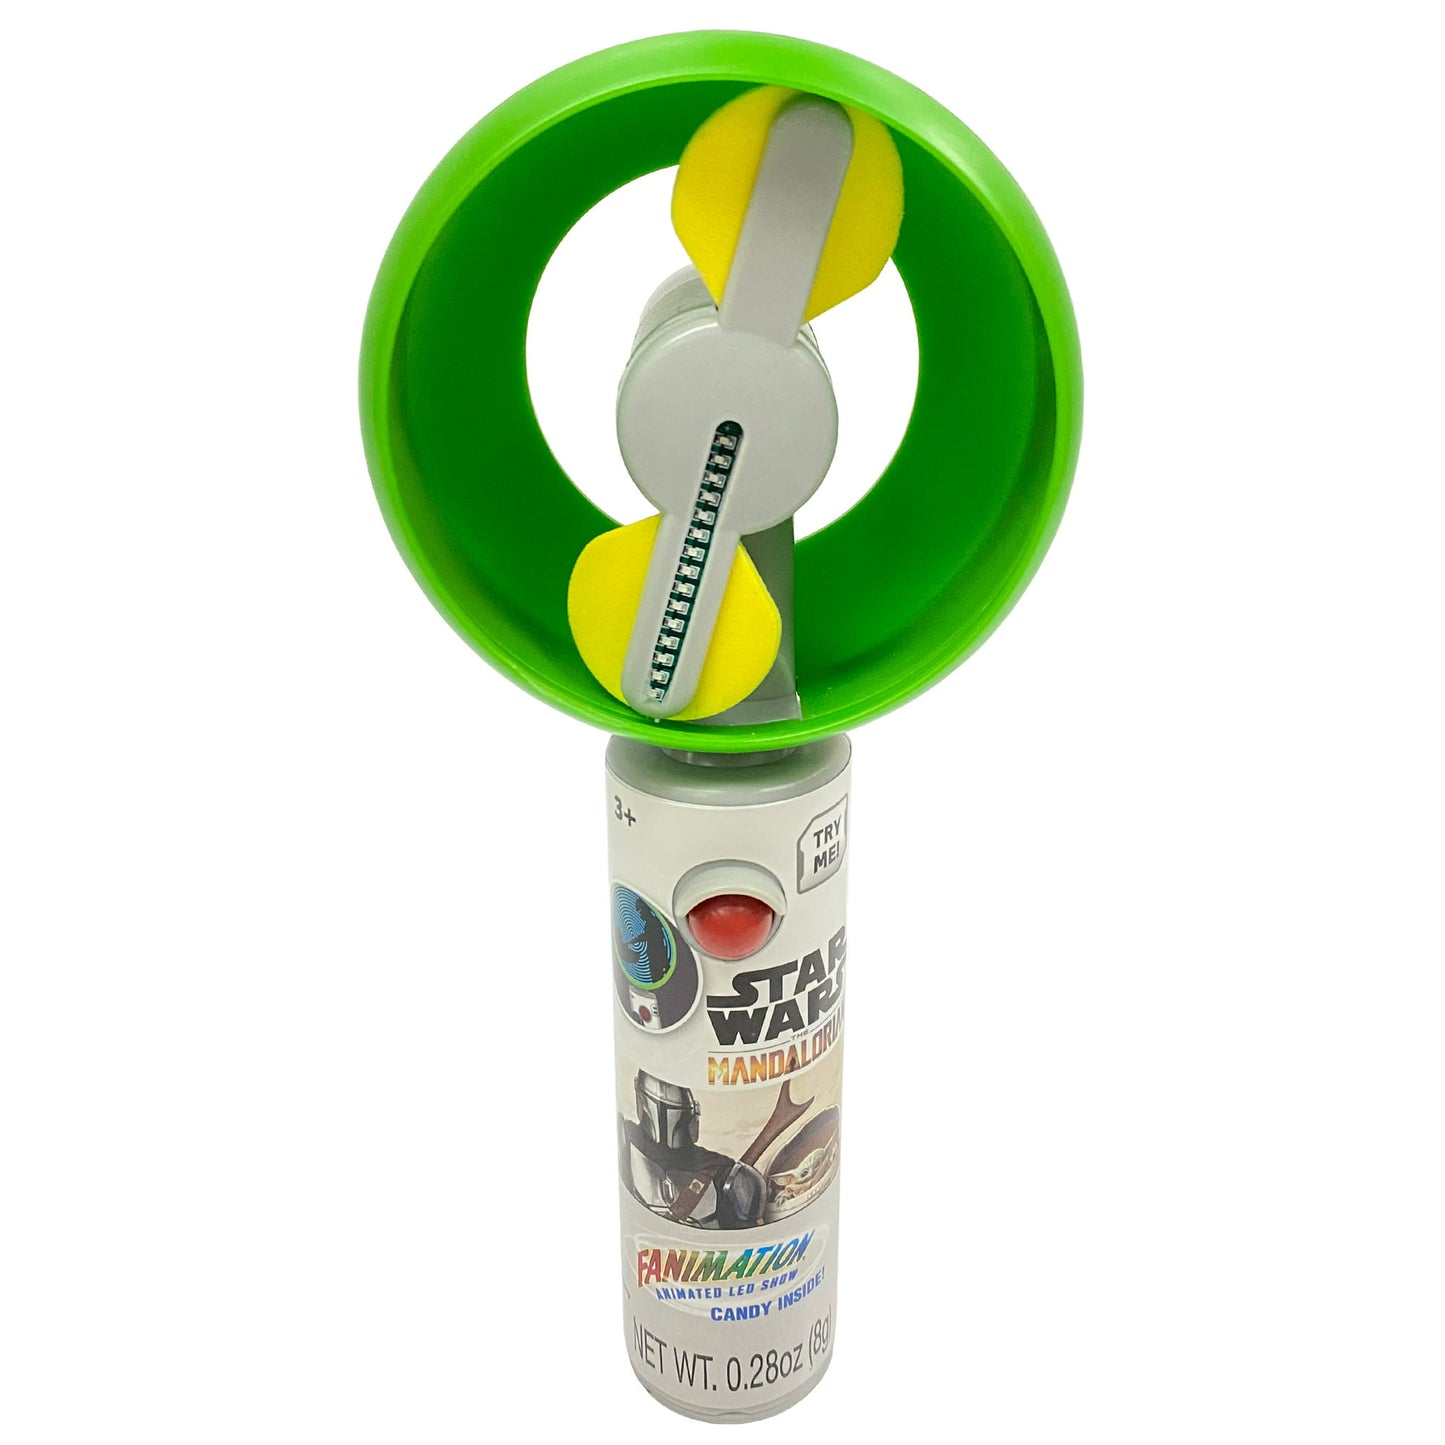 Star Wars the Mandalorian Fanimation Animated Led Fan With Candy